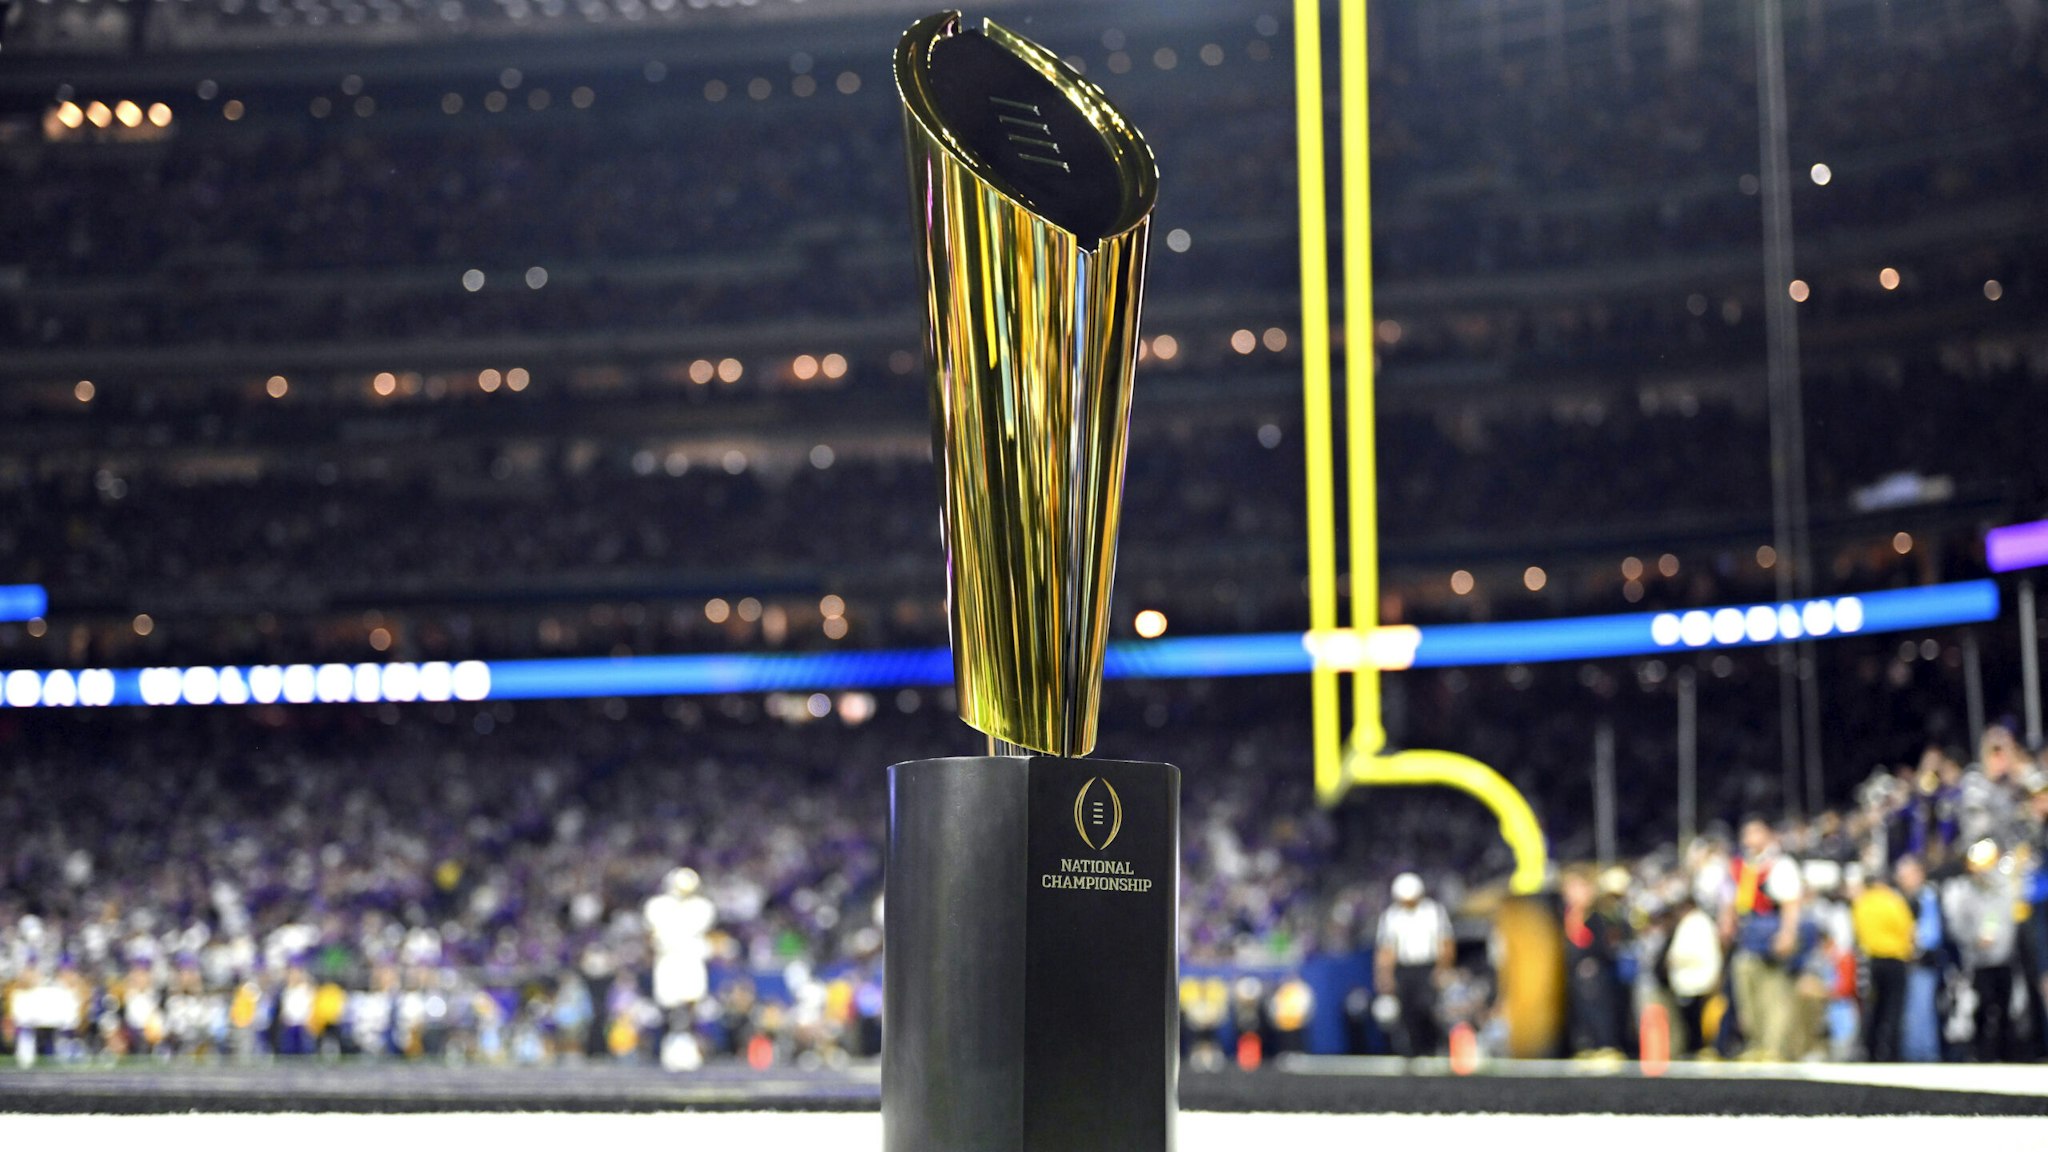 HOUSTON, TEXAS - JANUARY 08: A view of the The College Football Playoff National Championship Trophy during the 2024 CFP National Championship game between the Michigan Wolverines and the Washington Huskies at NRG Stadium on January 08, 2024 in Houston, Texas. The Michigan Wolverines won 34-13.